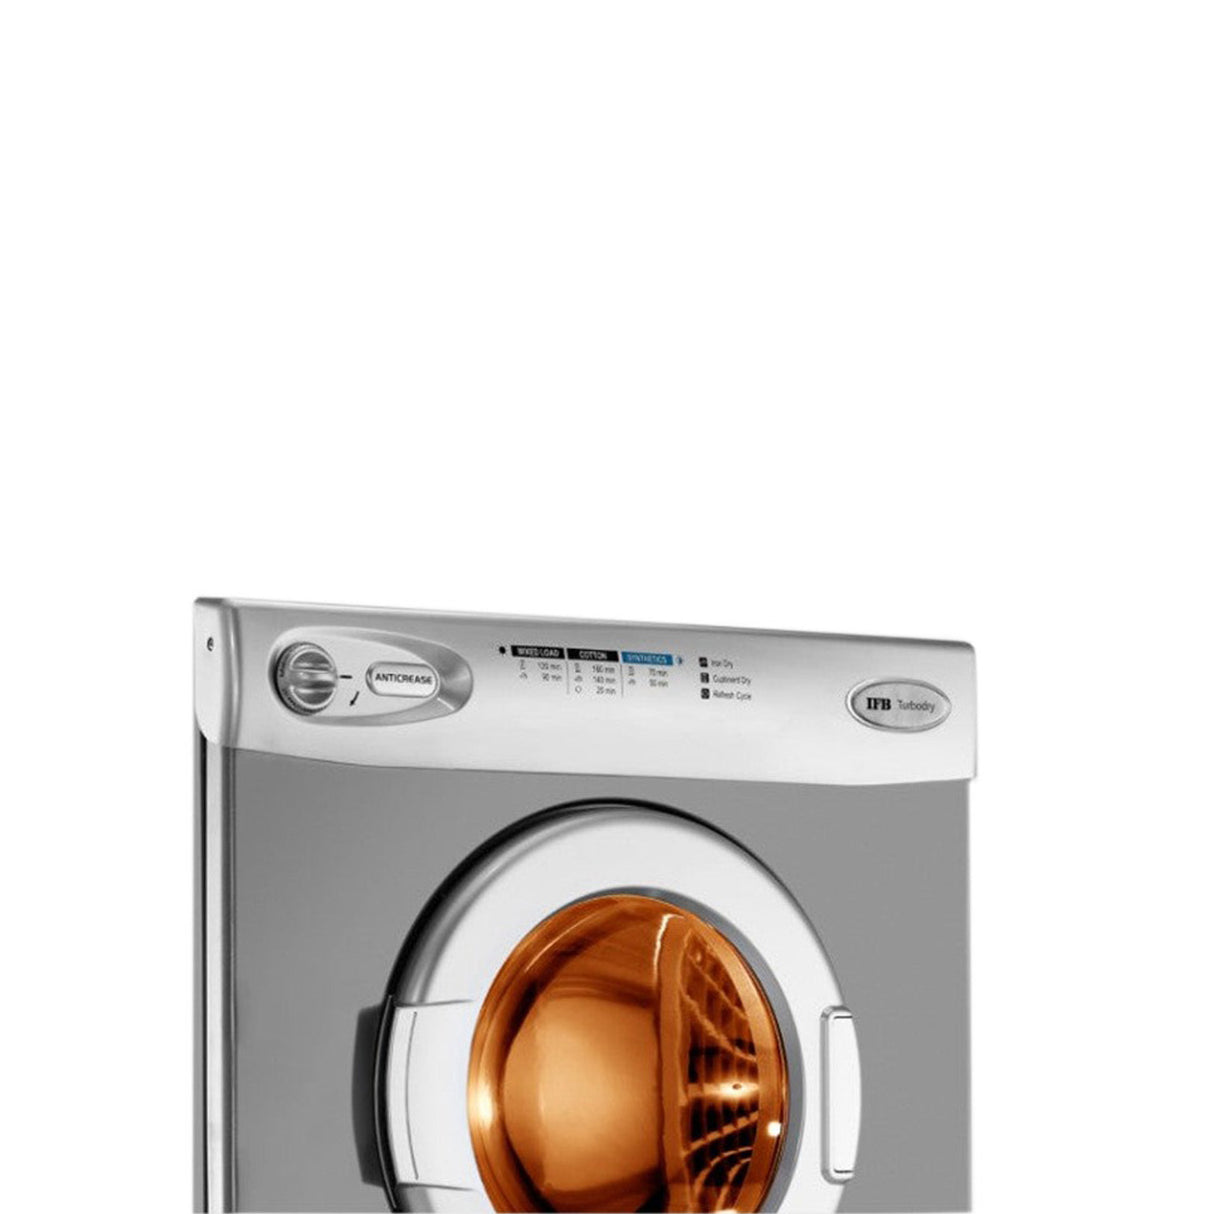 IFB 5.5 kg Fully-automatic Dryer (TURBO DRY EX, Silver, Wall Mountable,Anti crease)